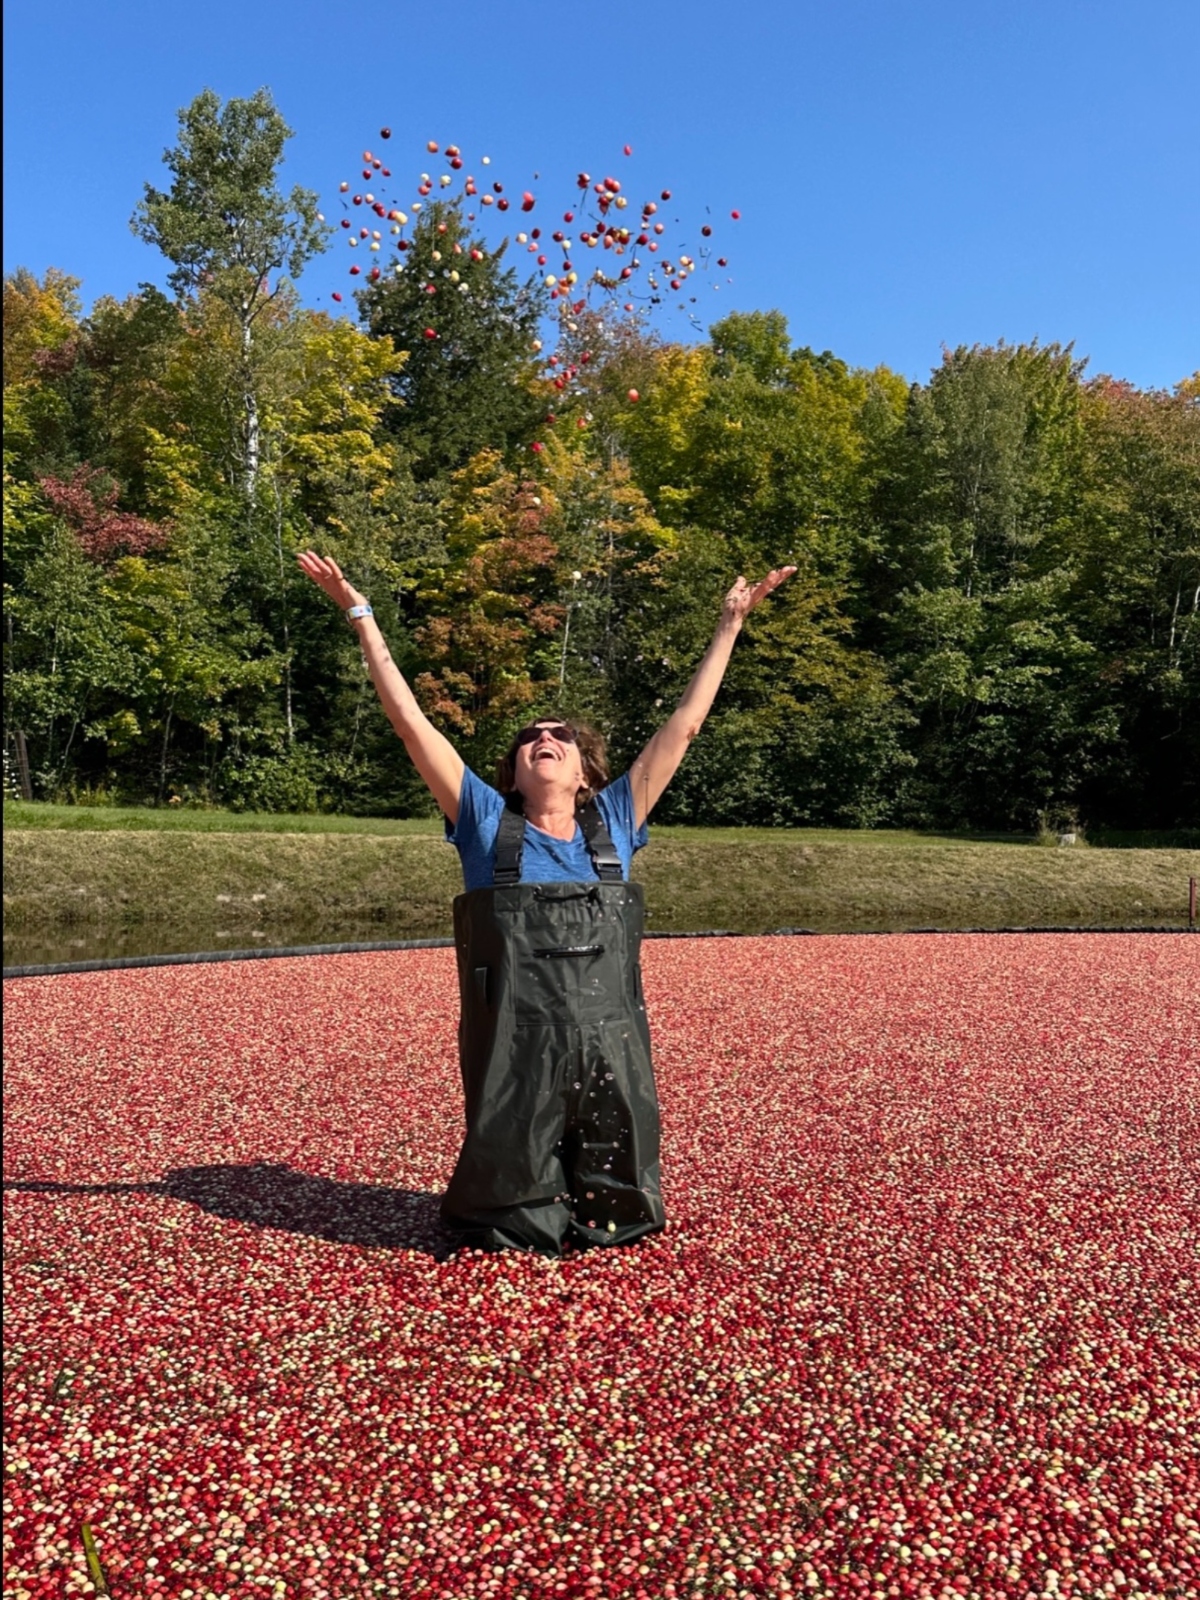 Cranberry bog with person in it throwing cranberries.